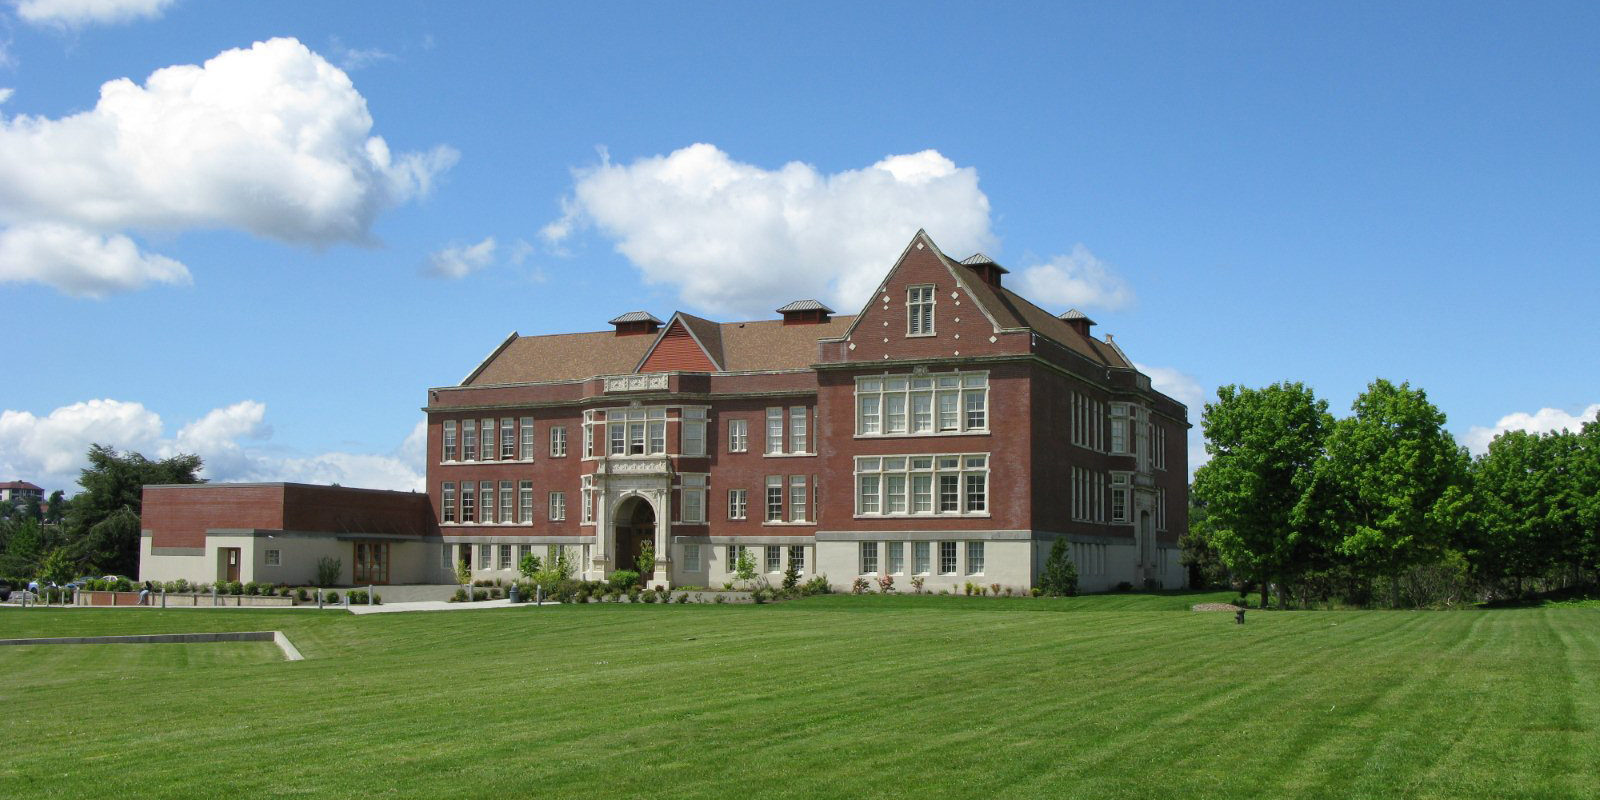 Seattle's historic Colman School building now houses the Northwest African American Museum